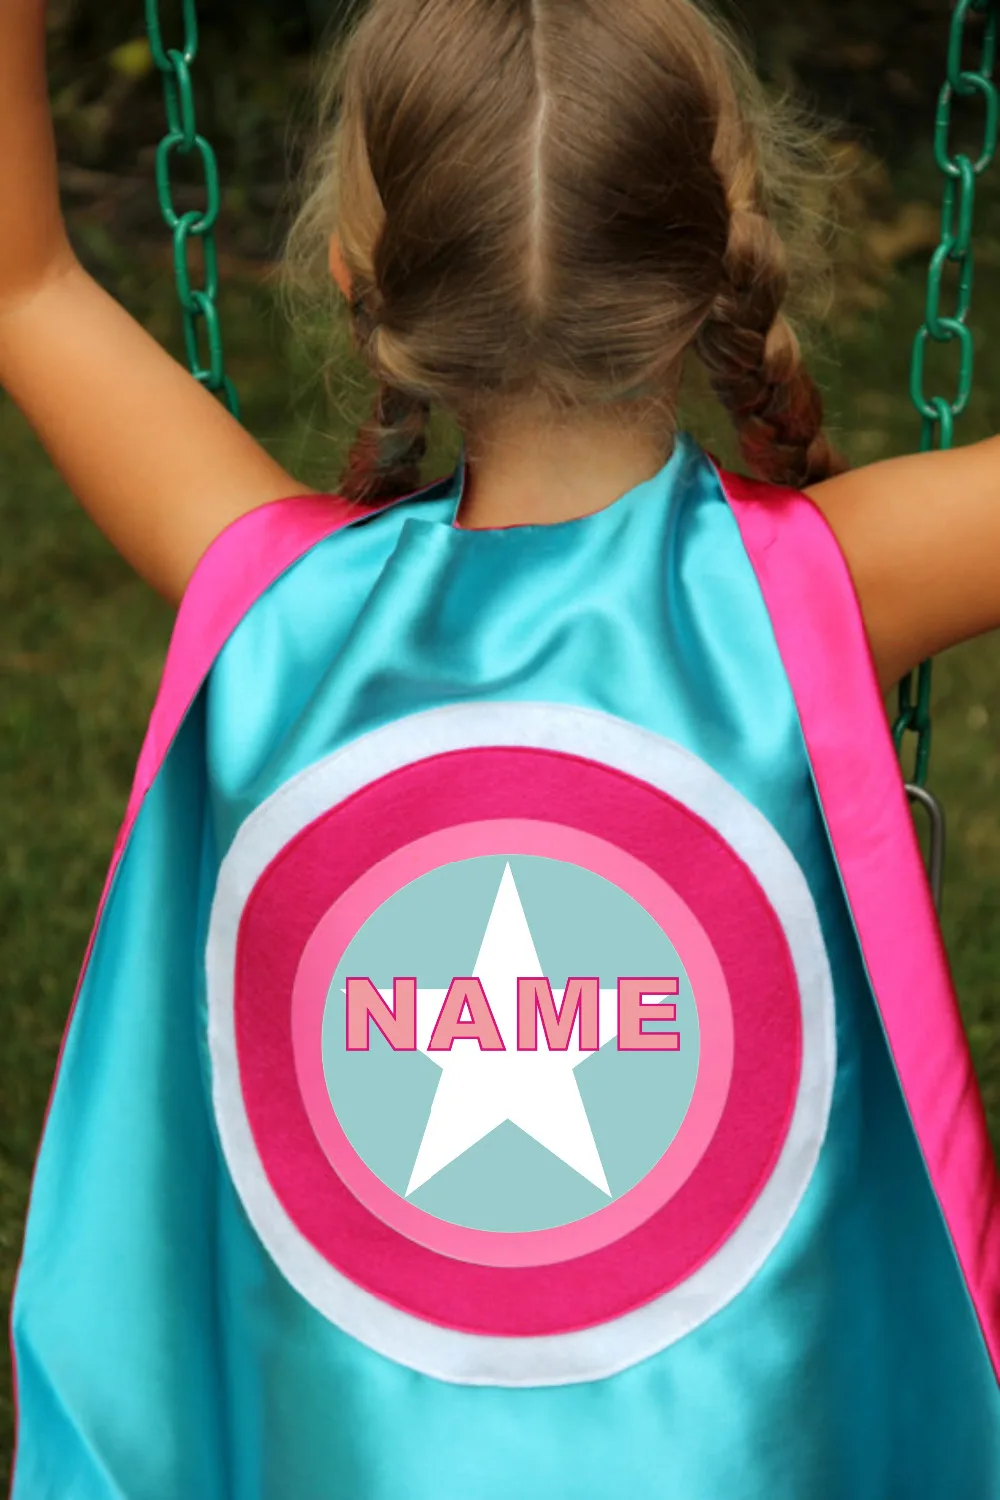 Boys Personalized Superhero Cape Customize with your childs Full Name Gift